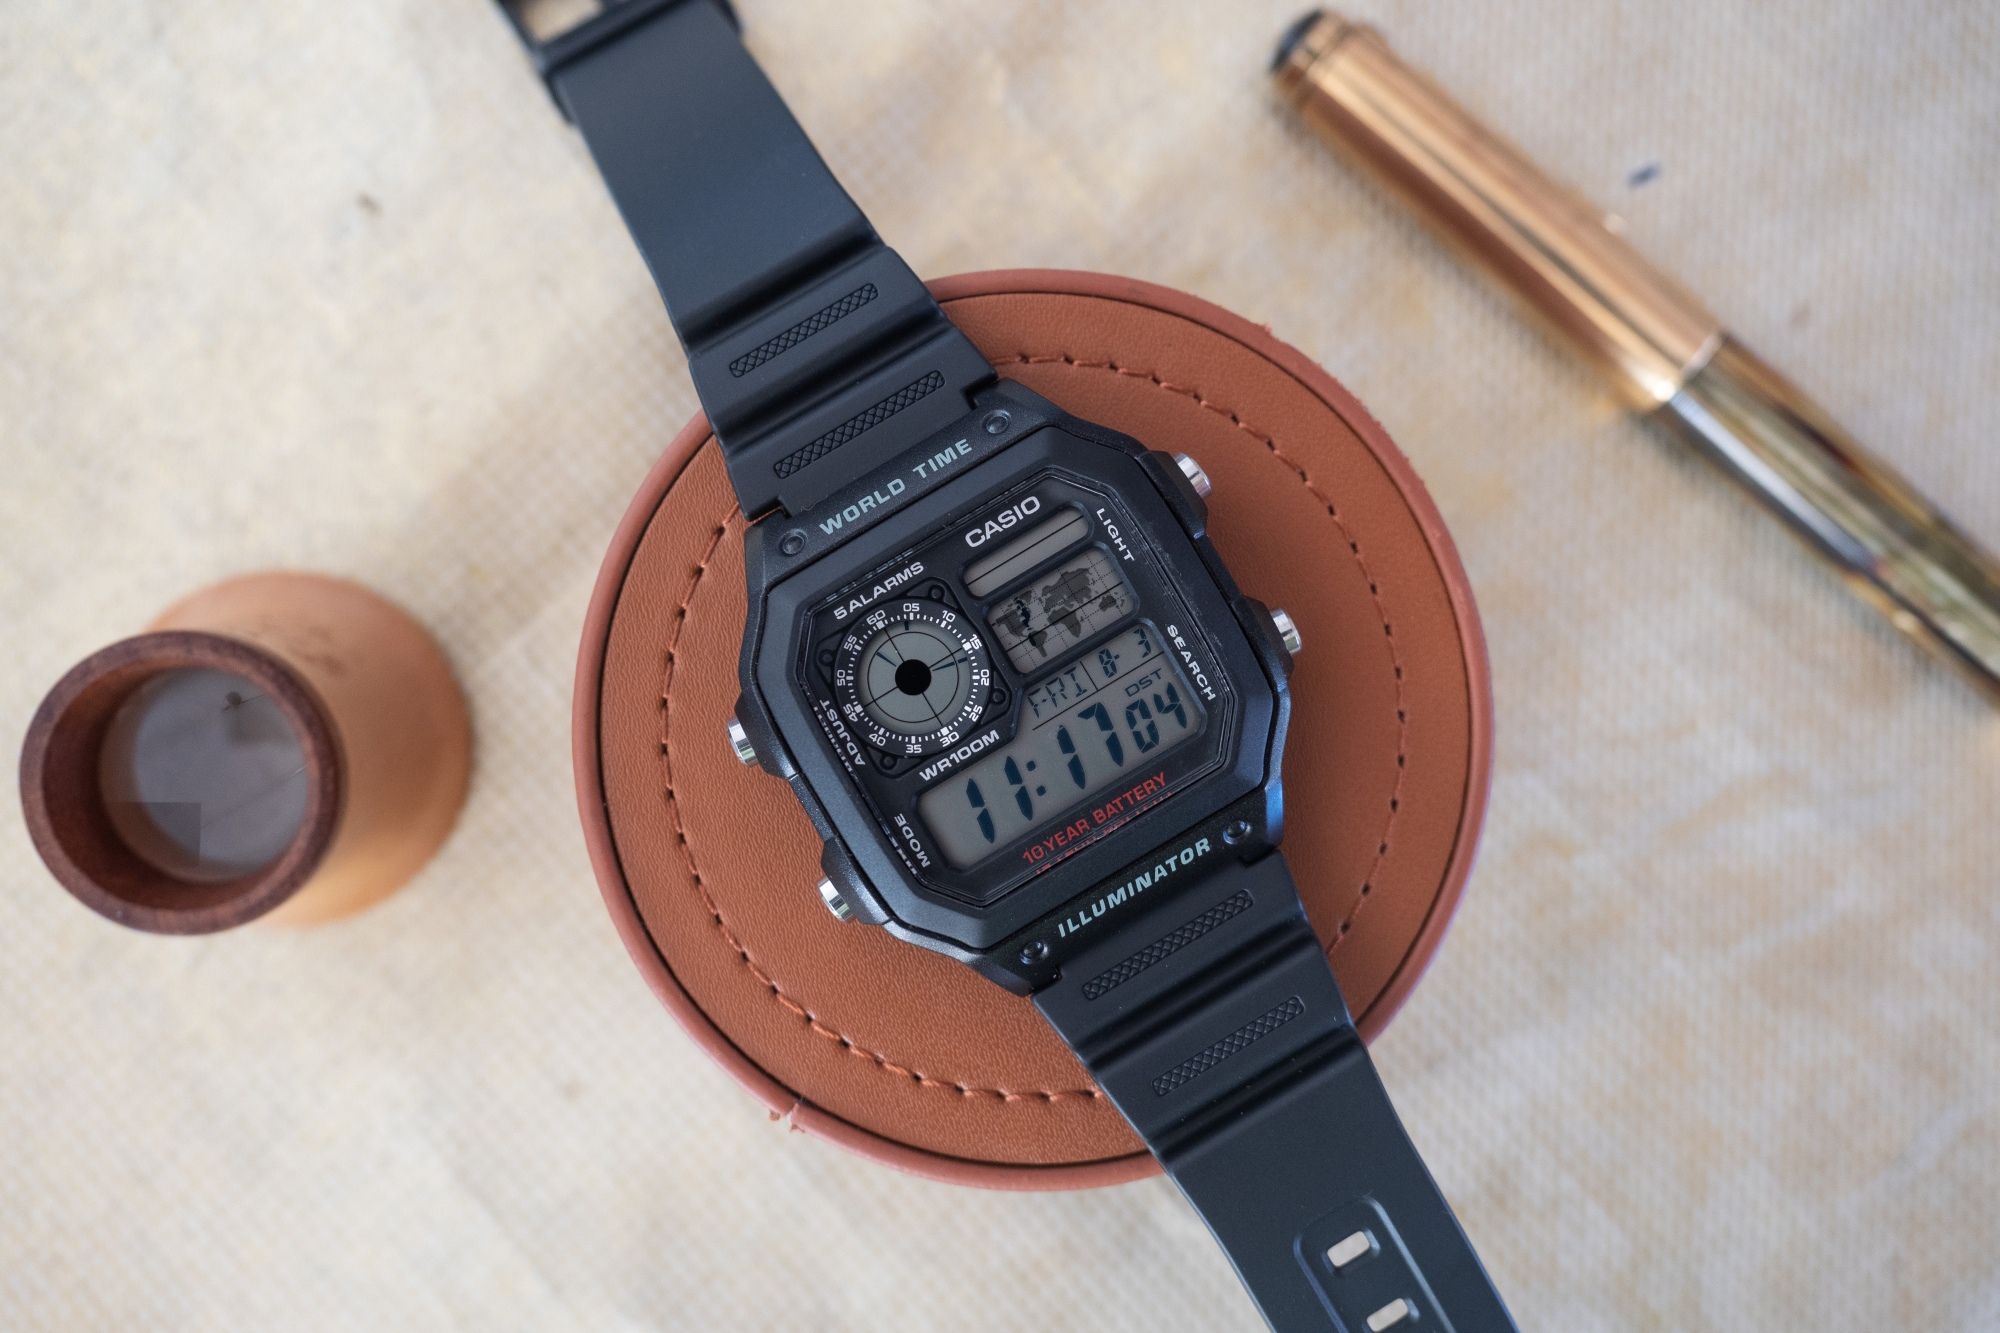 Ringlet Uitrusting koppeling Casio AE1200WH-1A World Timer Watch Review - Bloomberg